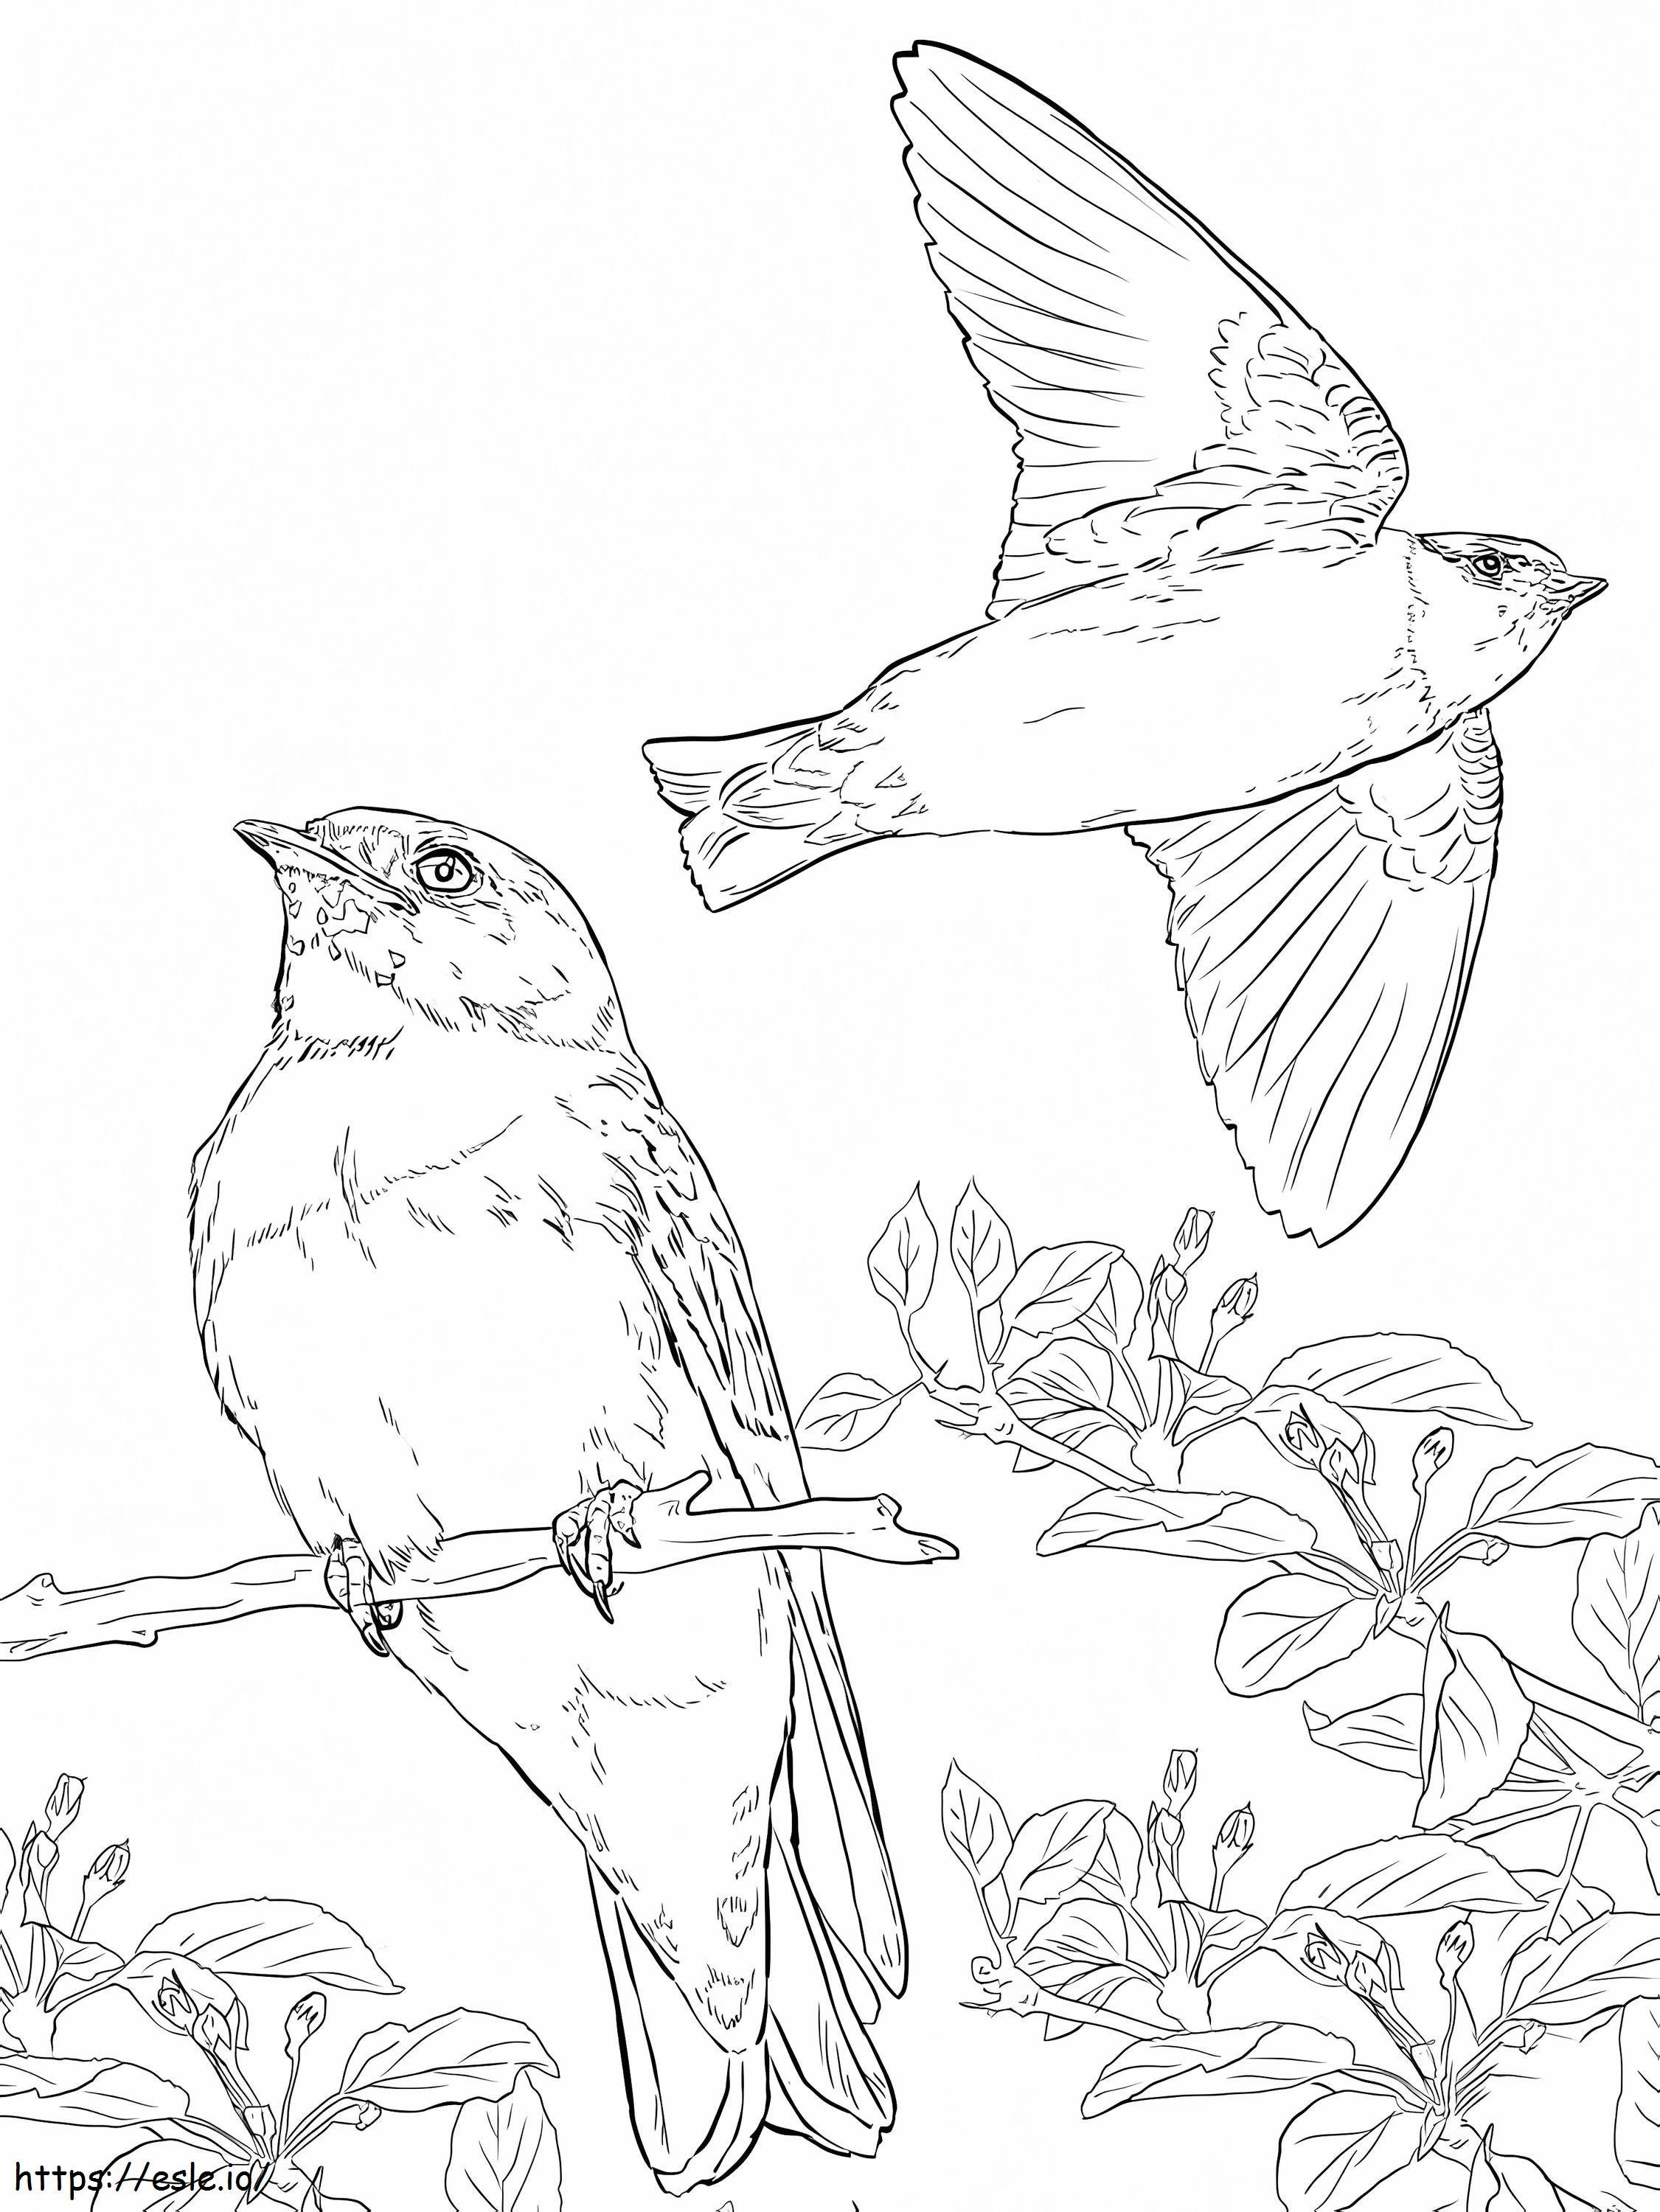 Cliff Swallows coloring page